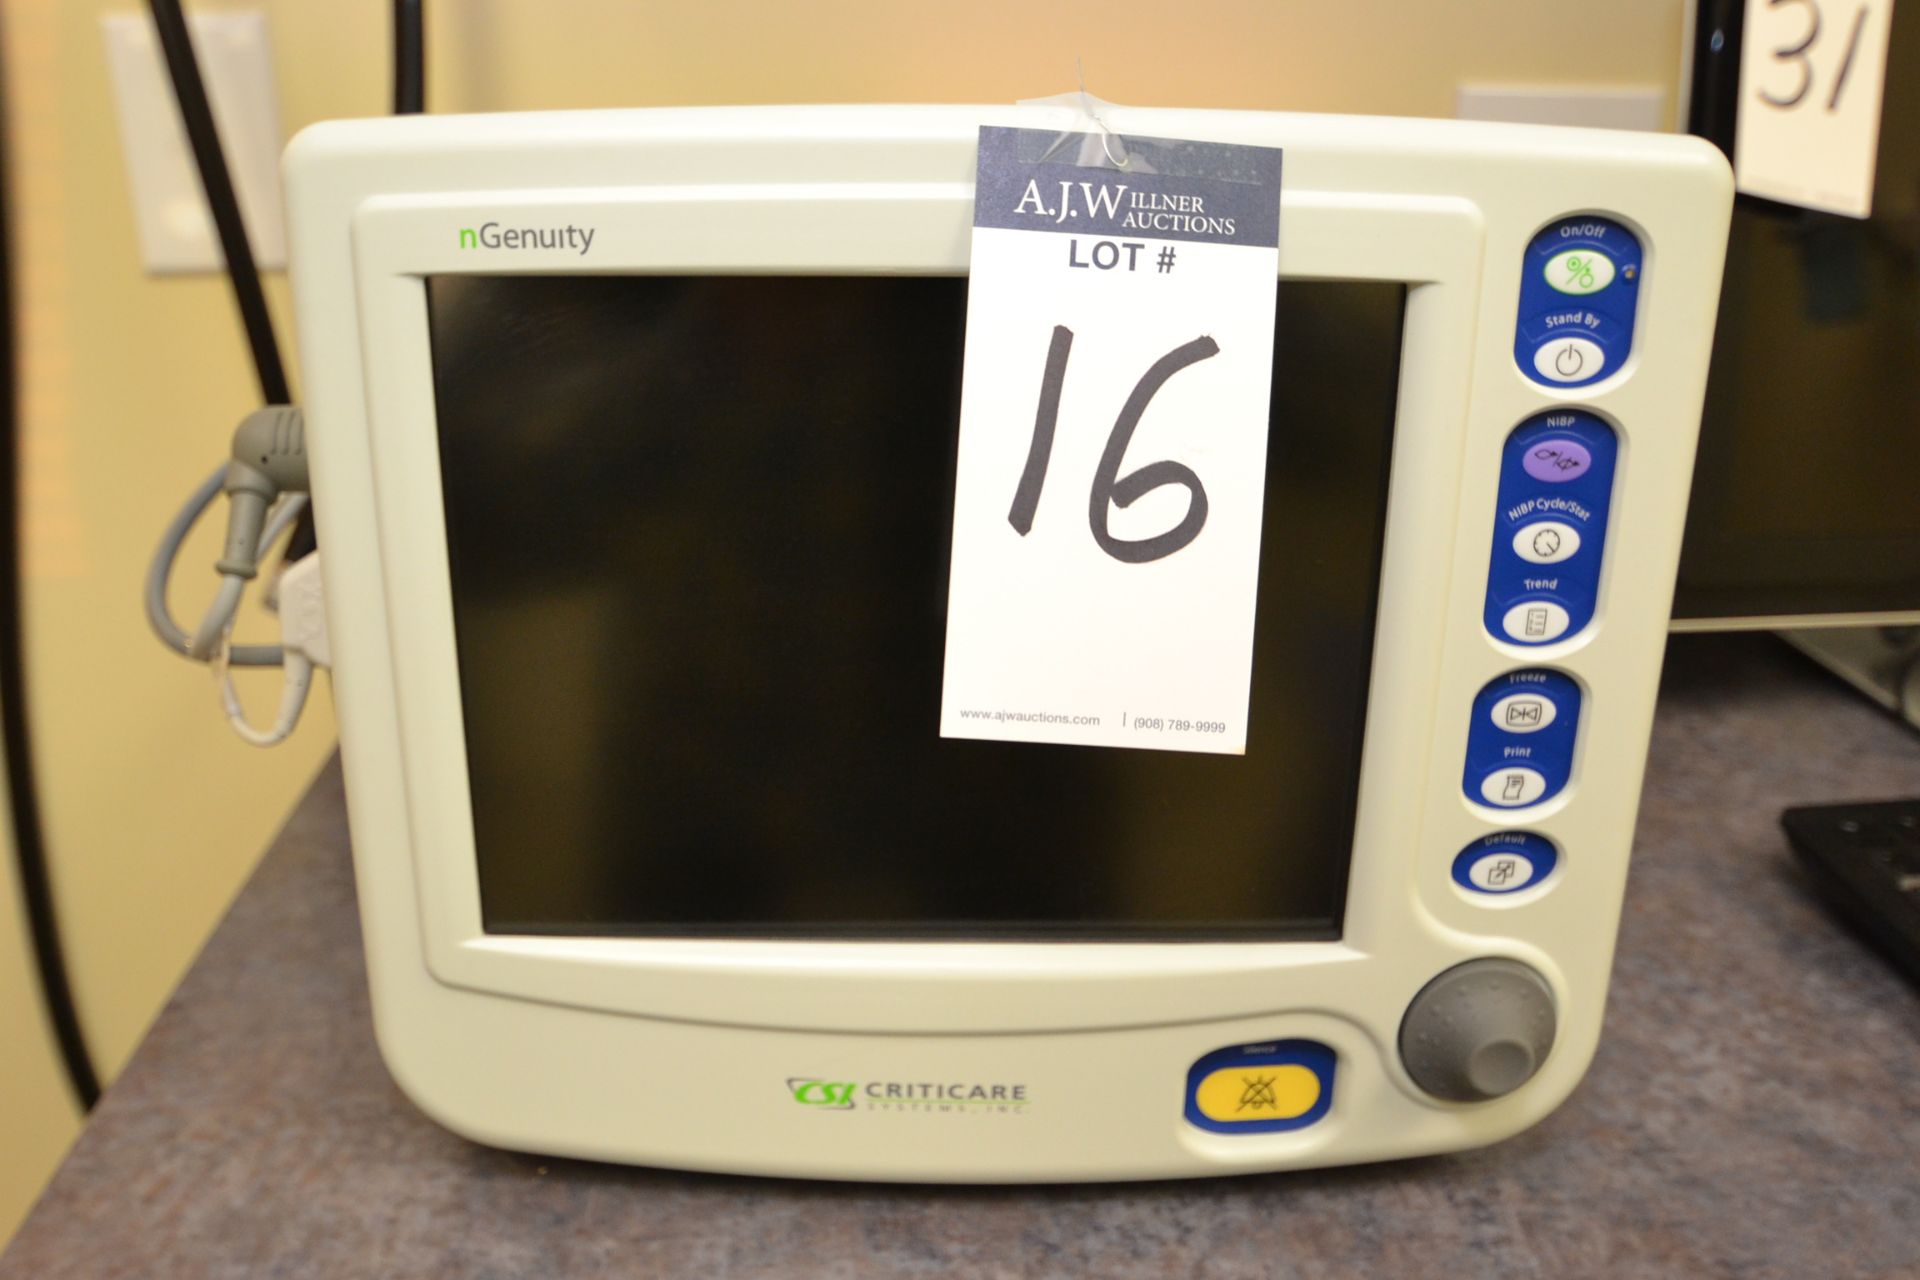 Criticare Model 8100 EP1 nGenuity Patient Monitor s/n 210250157(REV4)